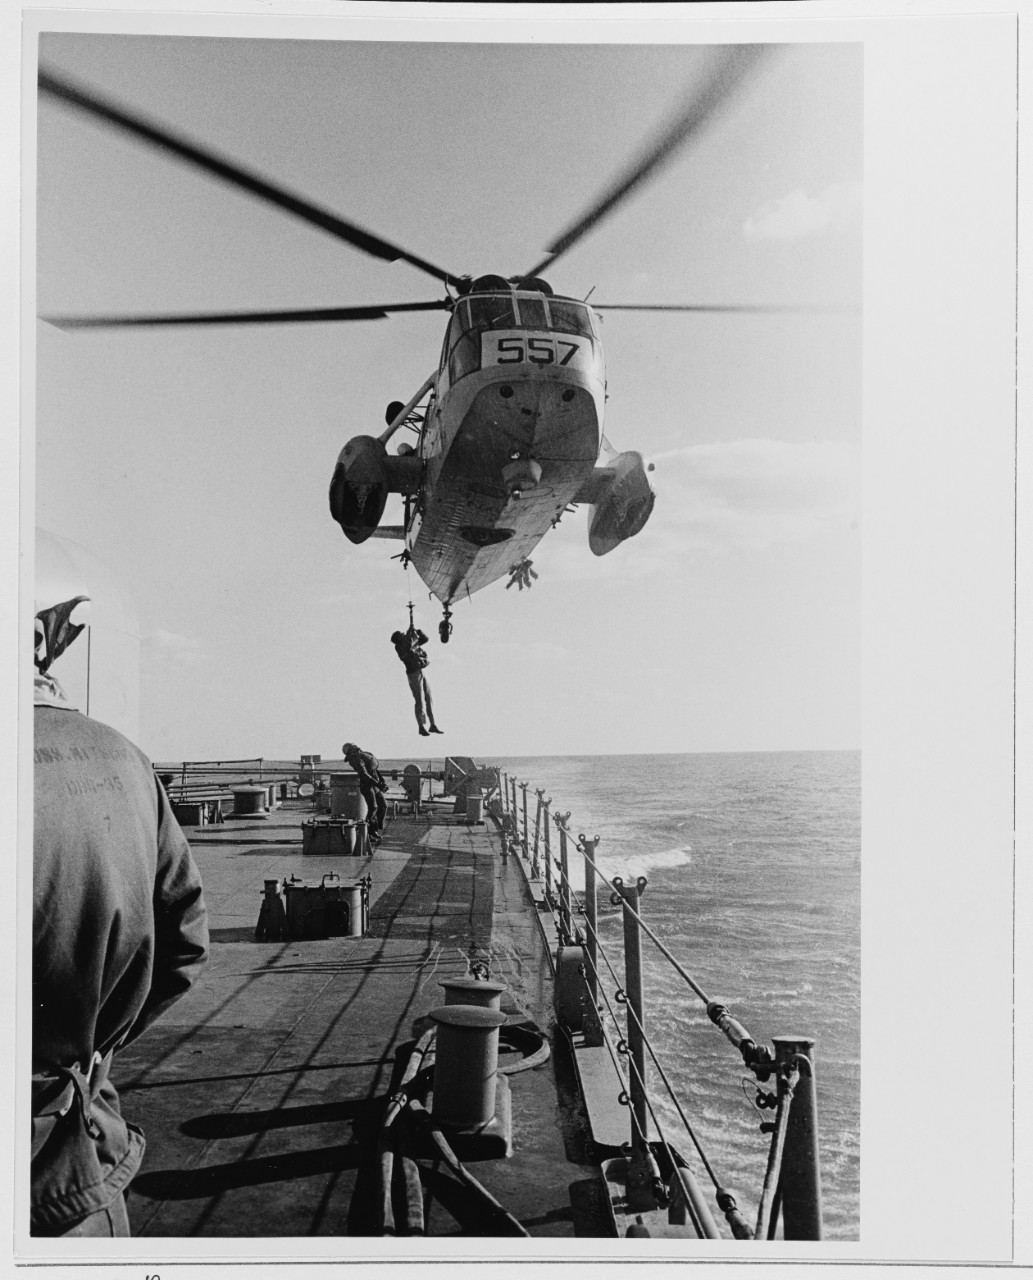 H-3 Sea King Helicopter